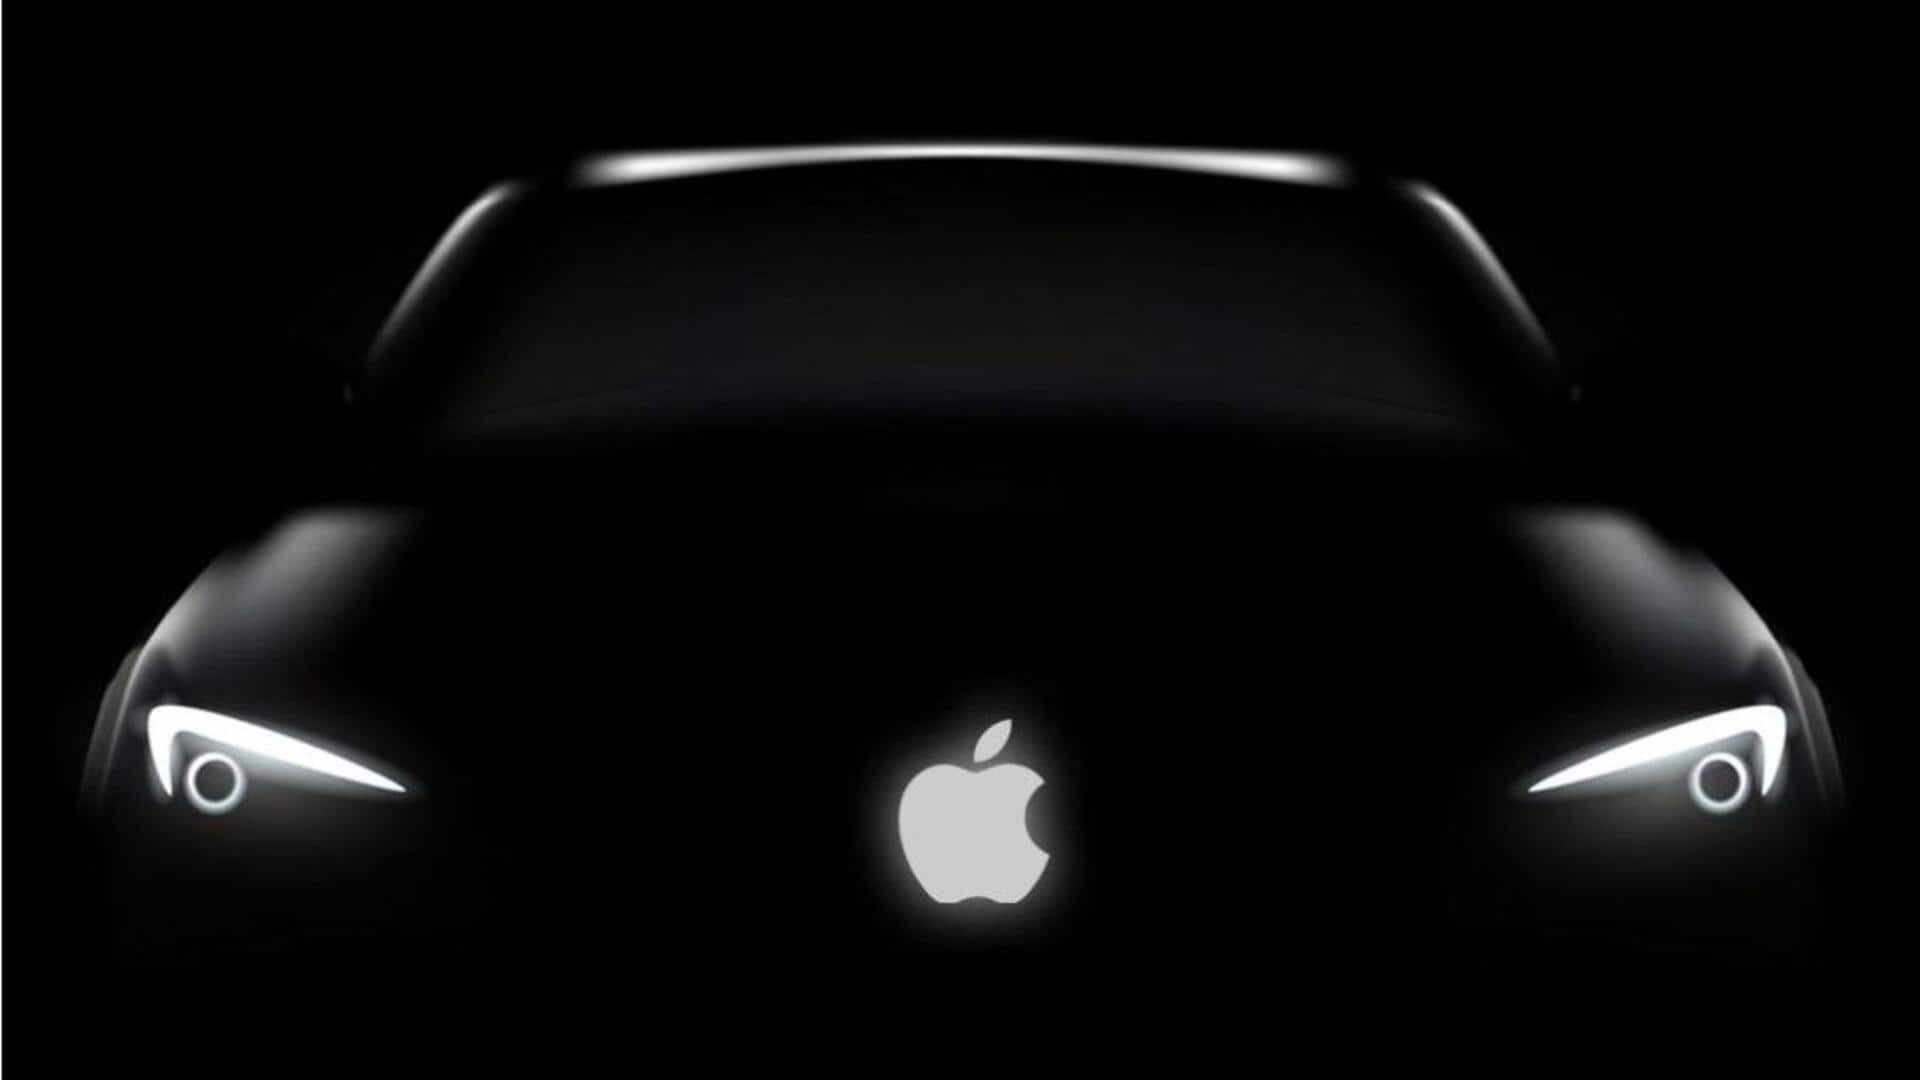 Apple Car set for 2028 launch with reduced self-driving capabilities